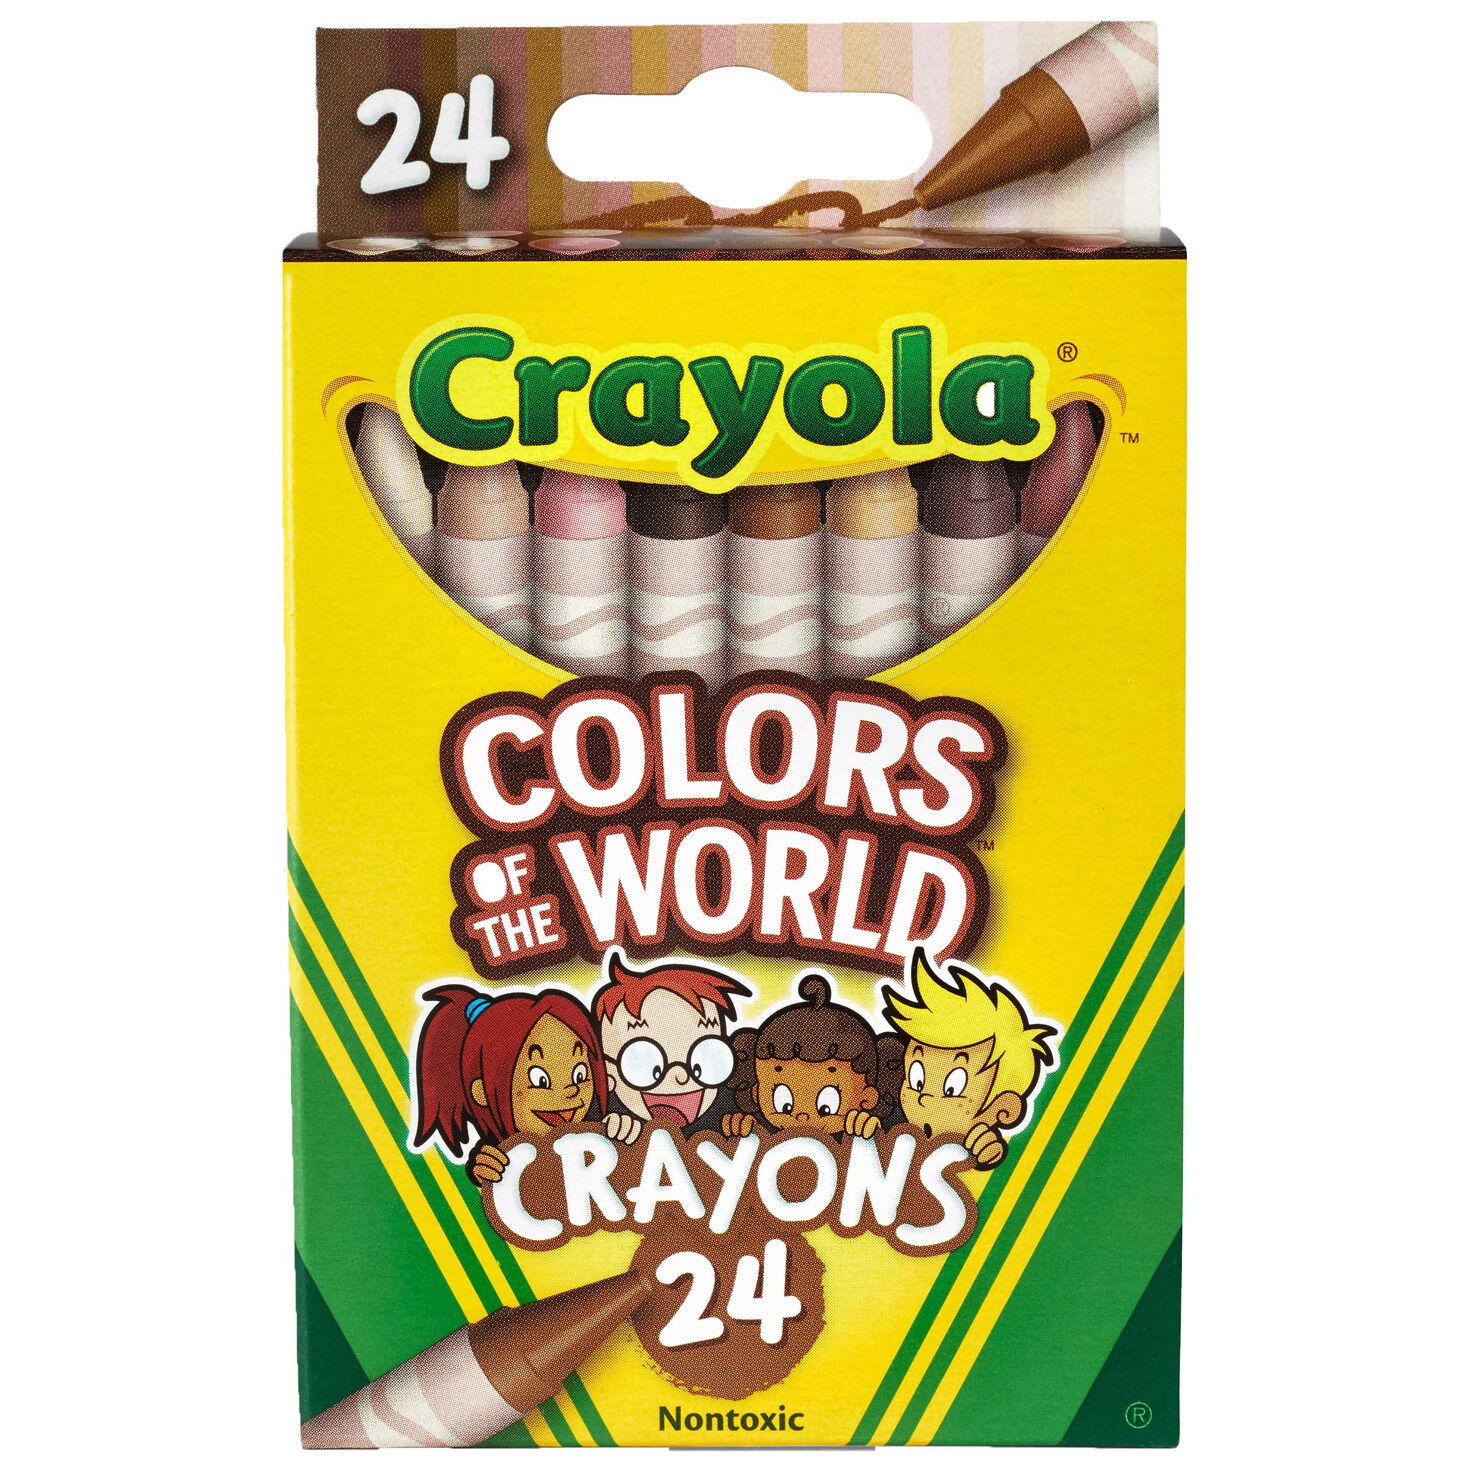 Crayola® Colors of the World Crayons, 24-Count for only USD 2.49 | Hallmark